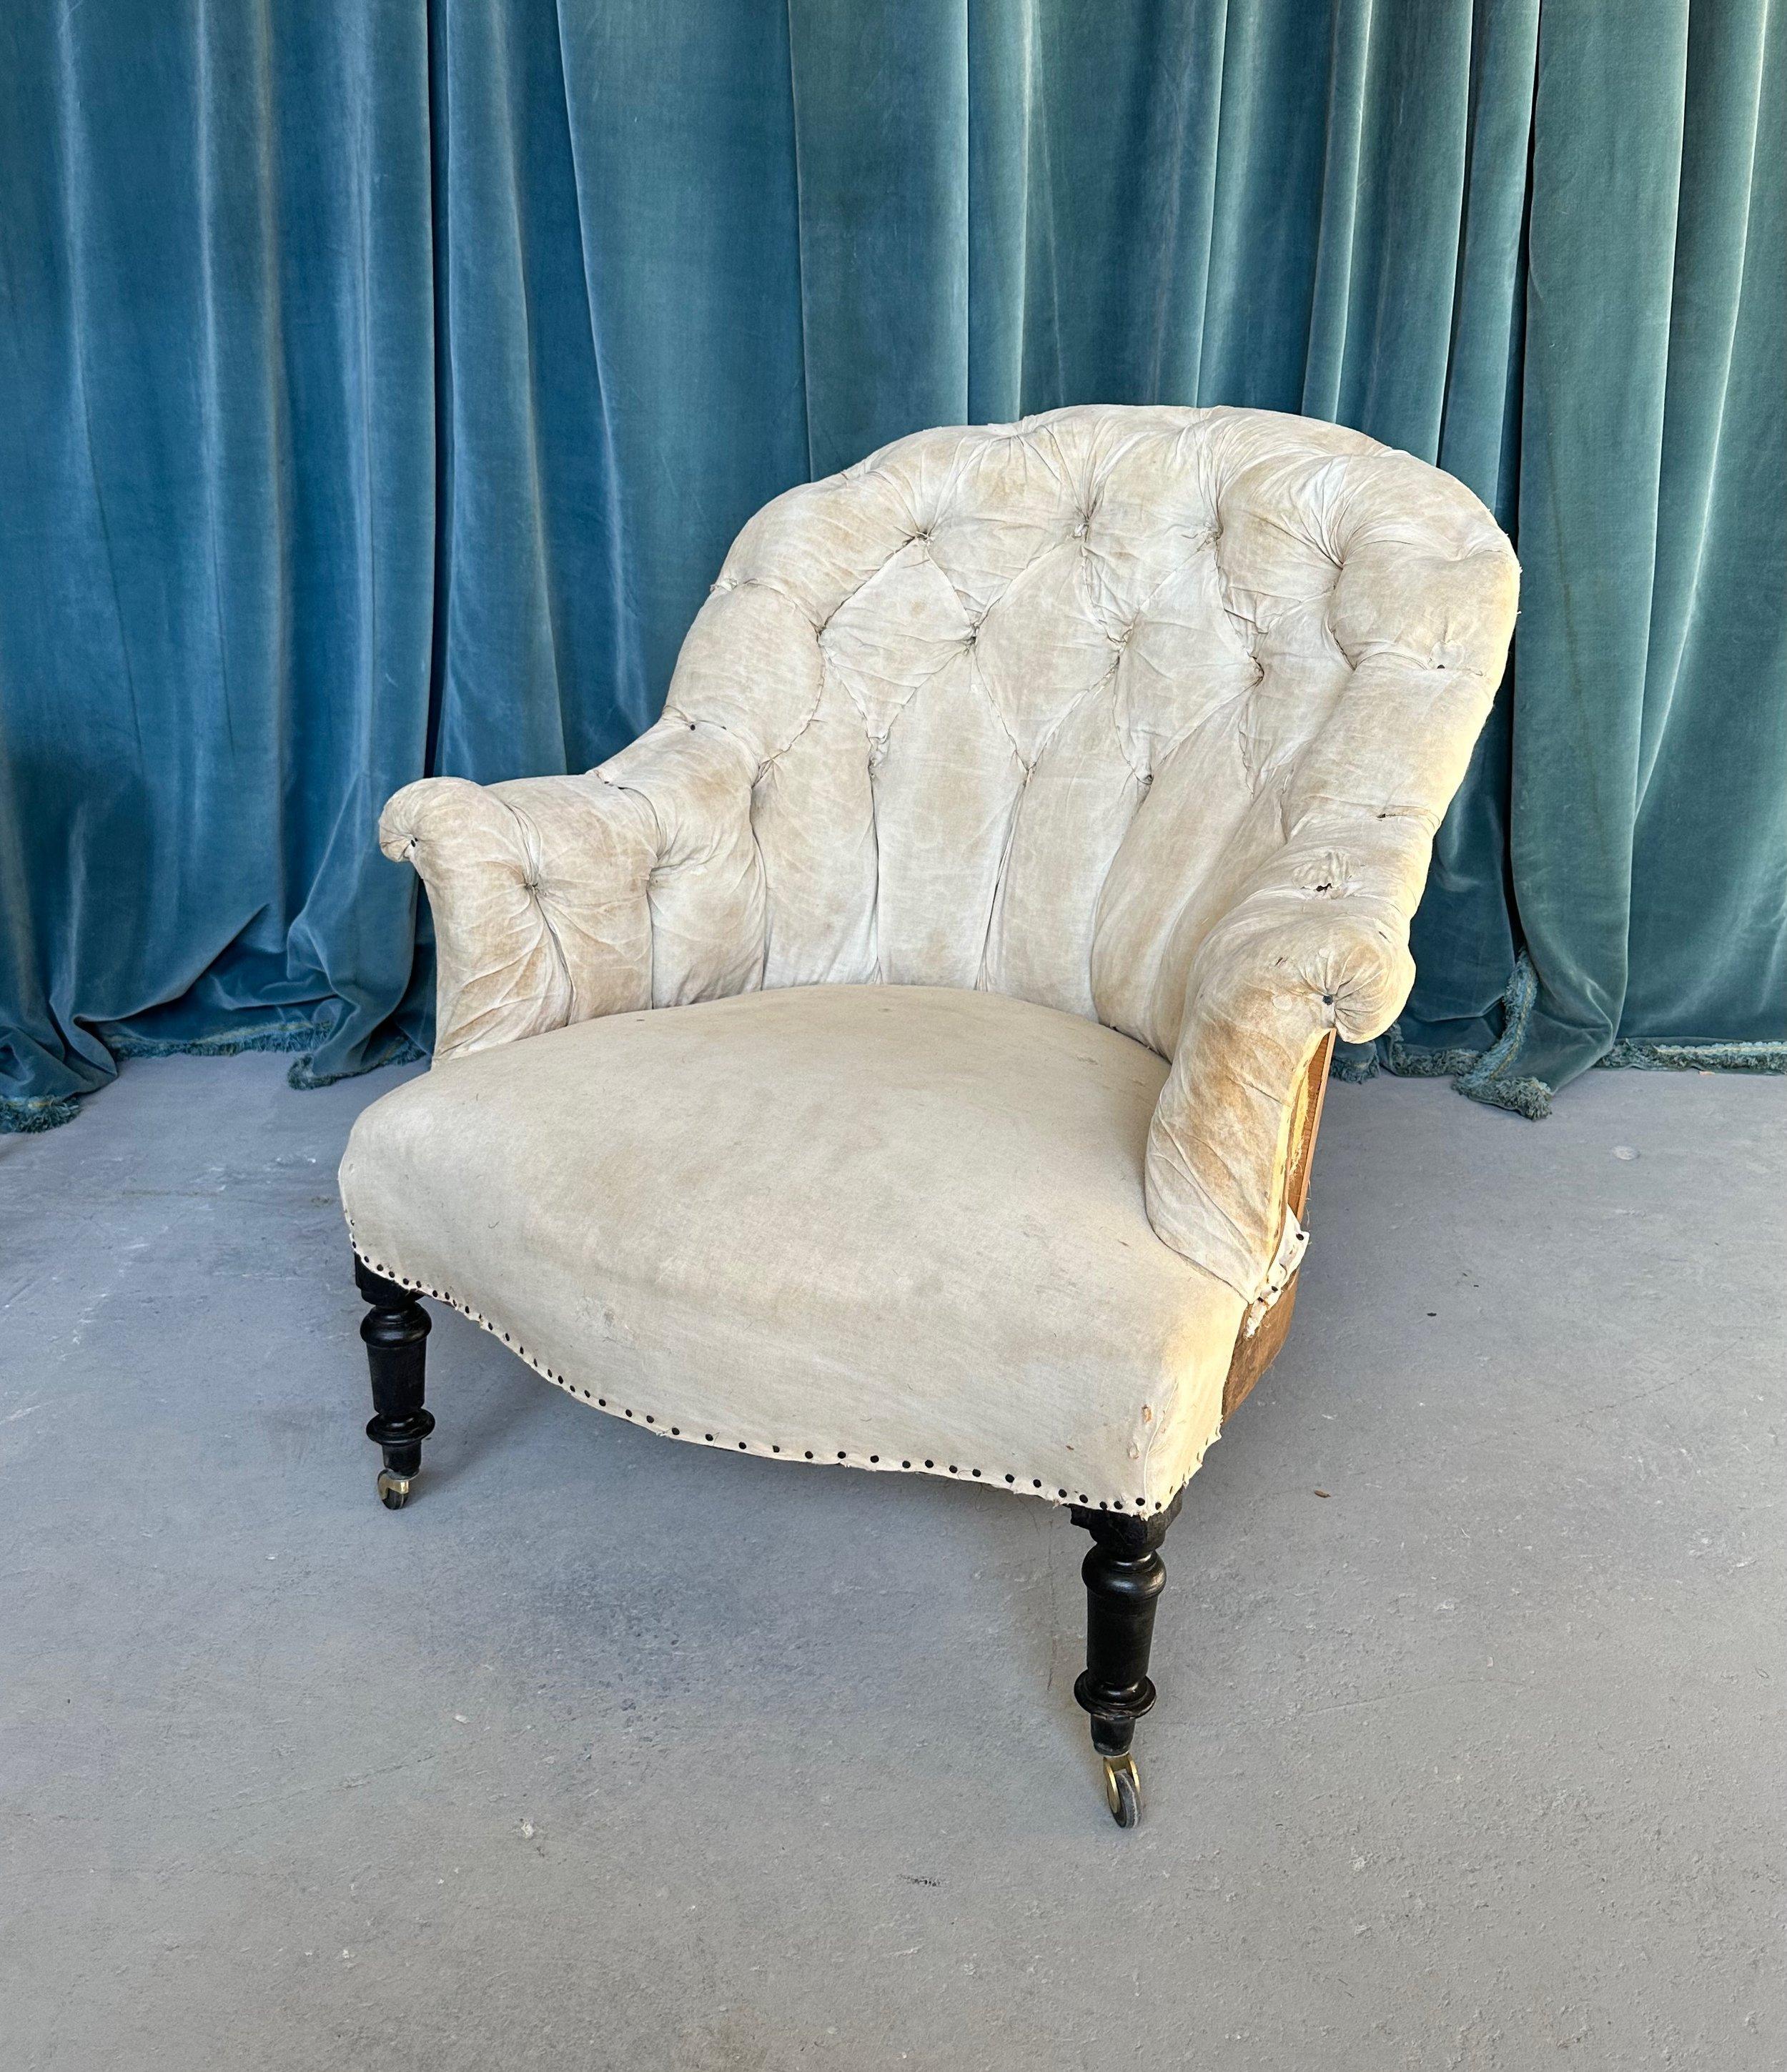 A handsome French 19th century armchair with diamond tufted back and scrolled arms. This elegant armchair from the Napoleon III period captures the intricate details and romantic beauty that is typical of this period in French design. The graceful